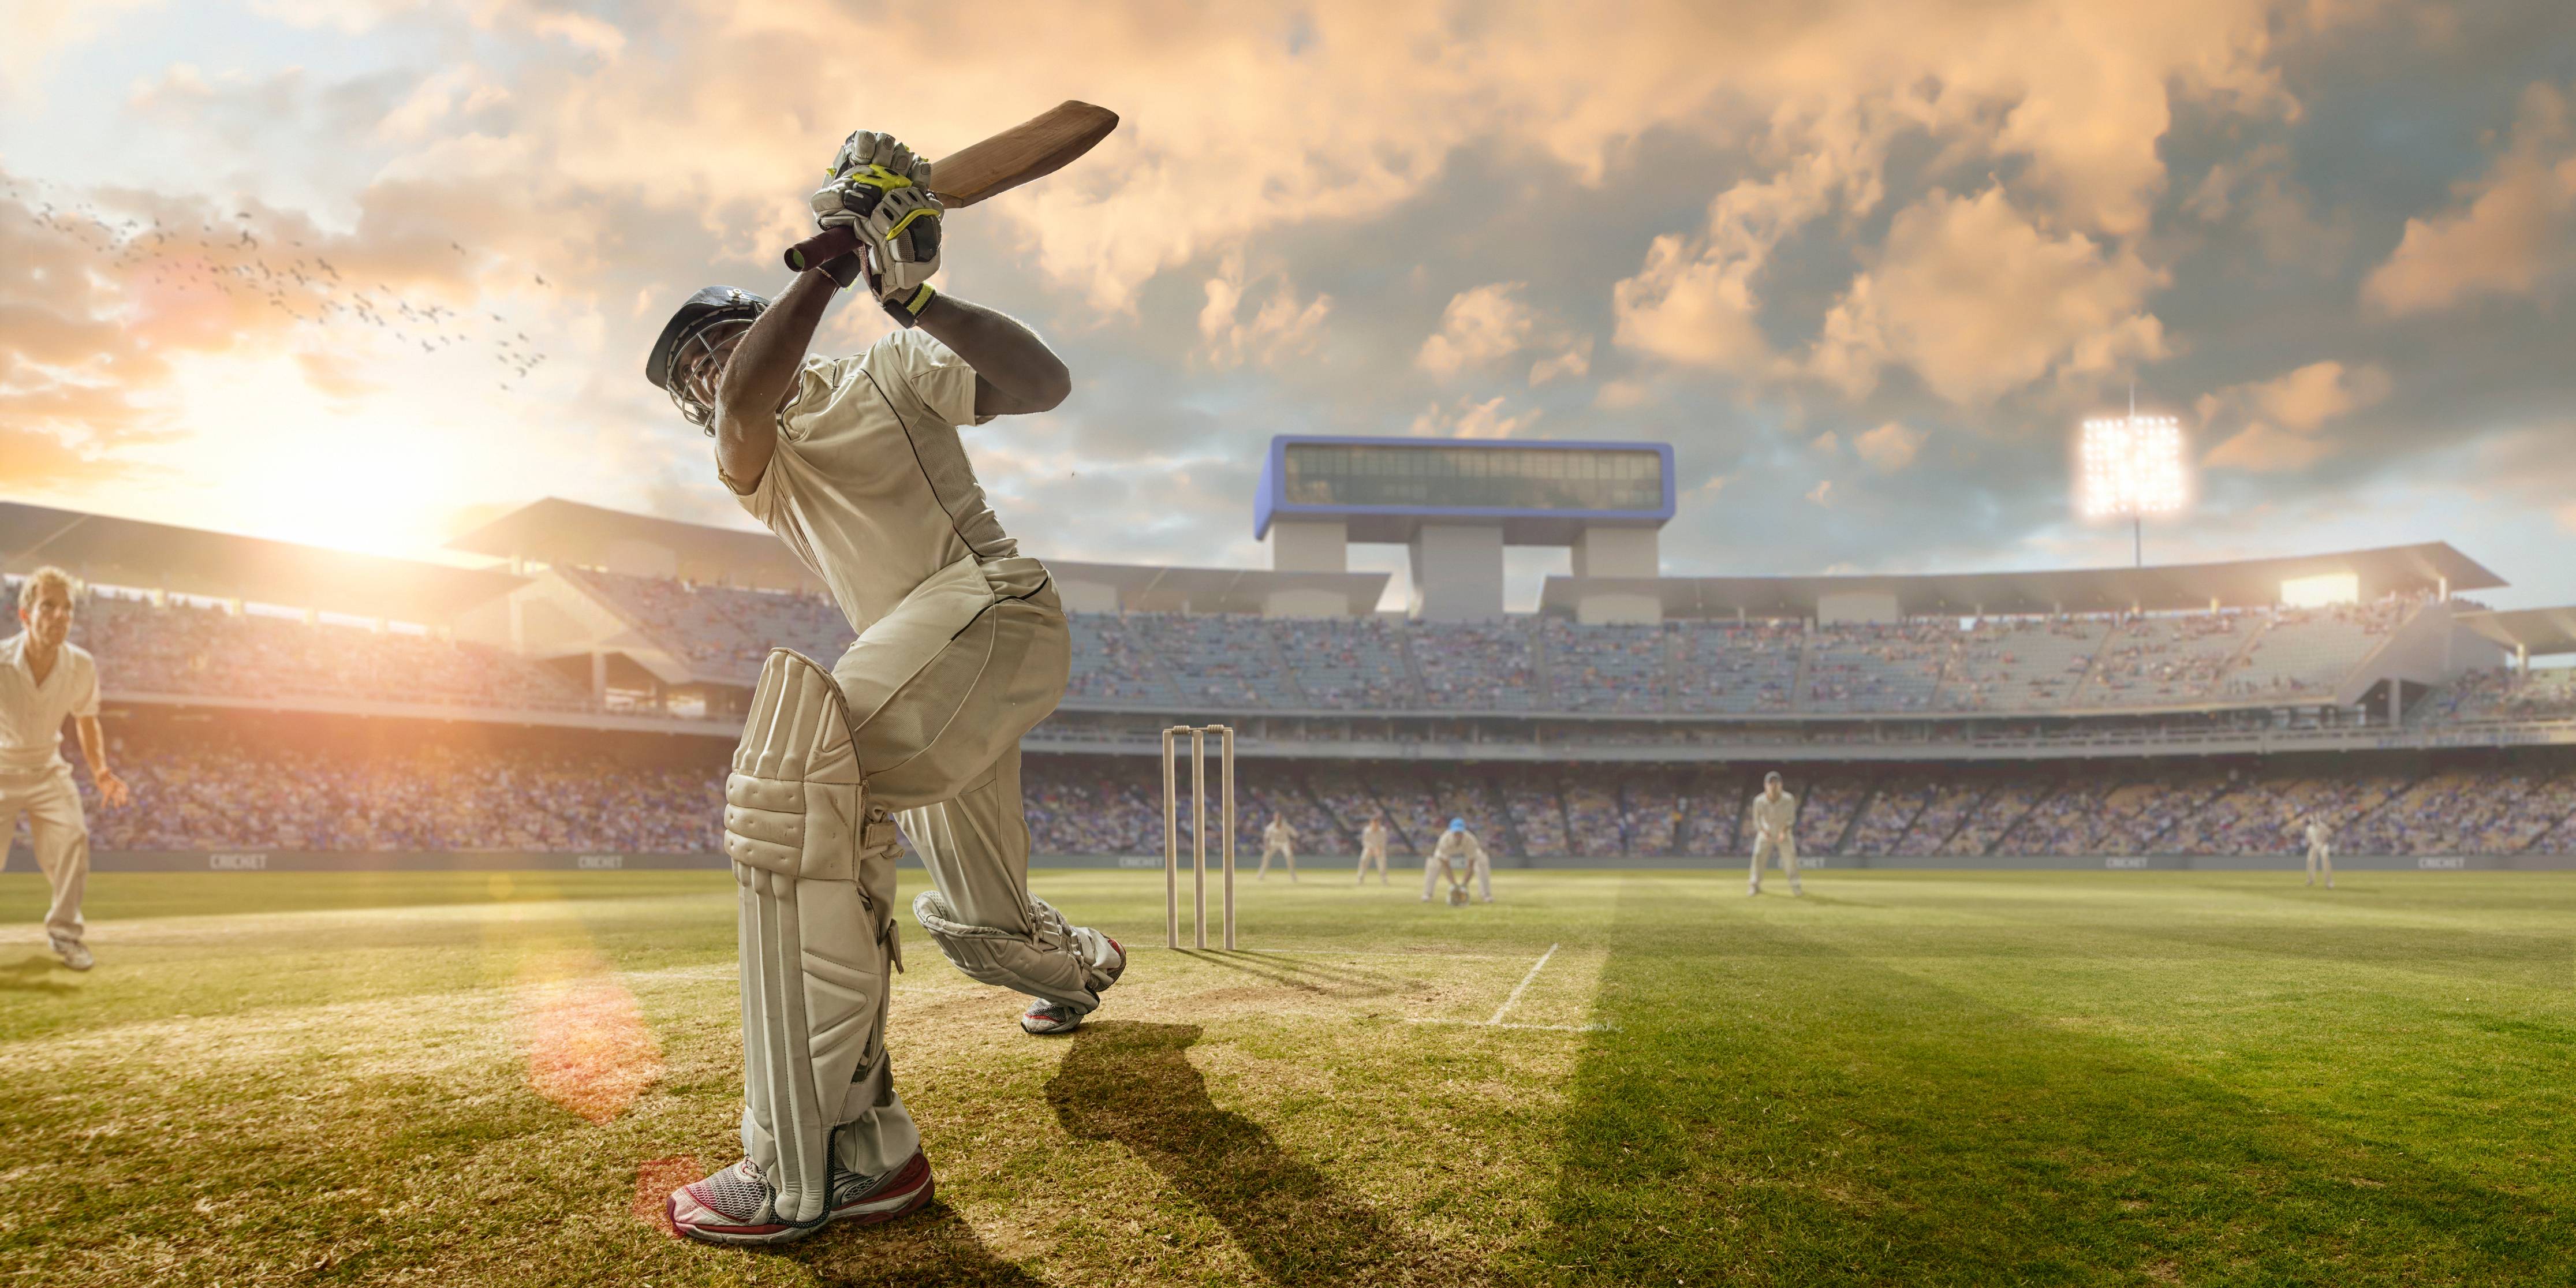 Cricket Background Stock Photos and Images  123RF